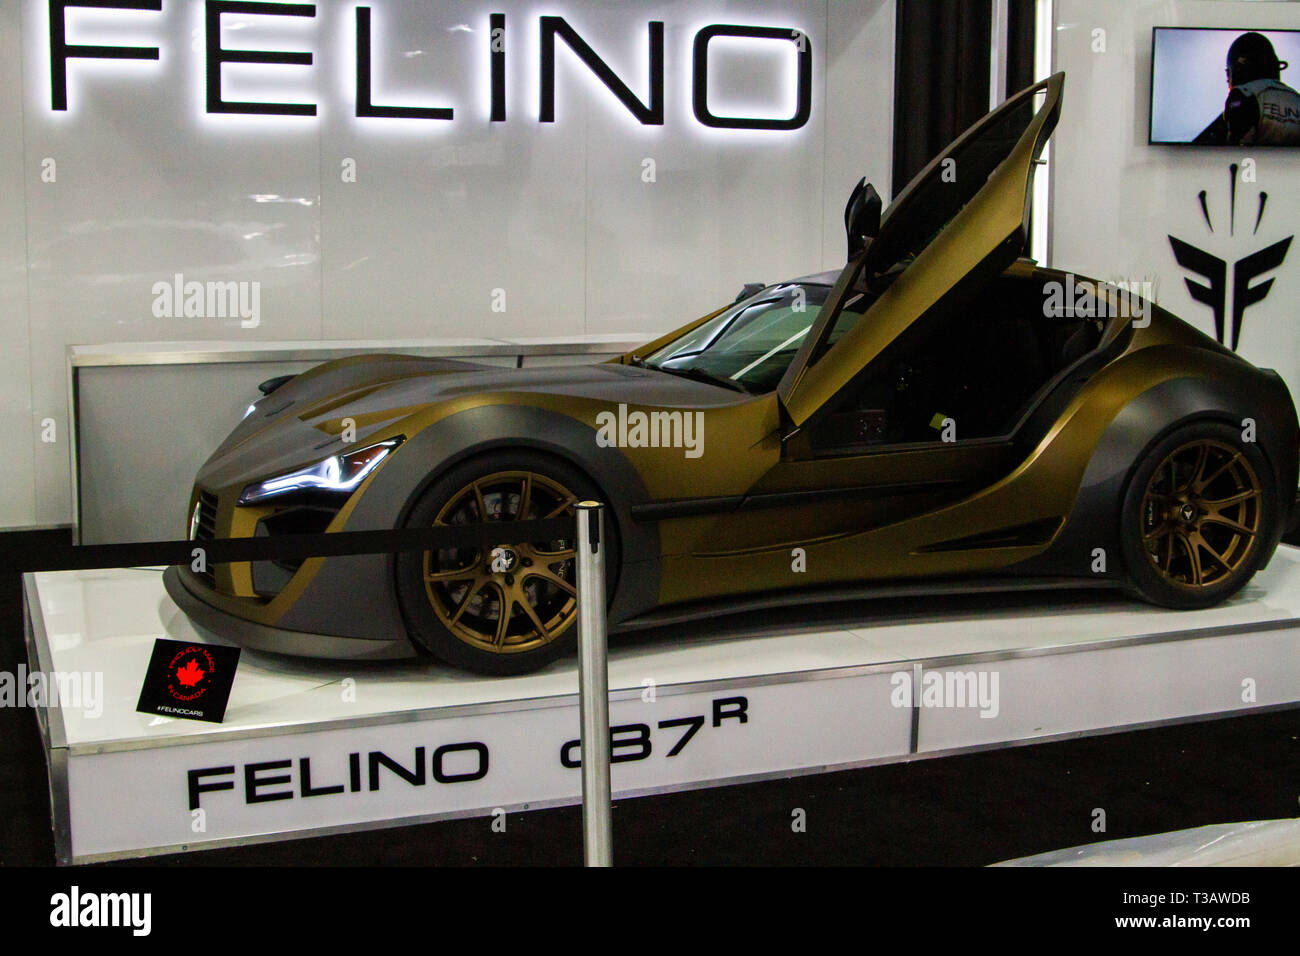 Edmonton, Alberta, Canada. 3rd Apr, 2019. Edmonton Motor Show Premier Car-  Felino Cars announces the Felino cB7r, one of only 10 being made and  manufactured in Laval Quebec, Canada. Retailing for $365,000